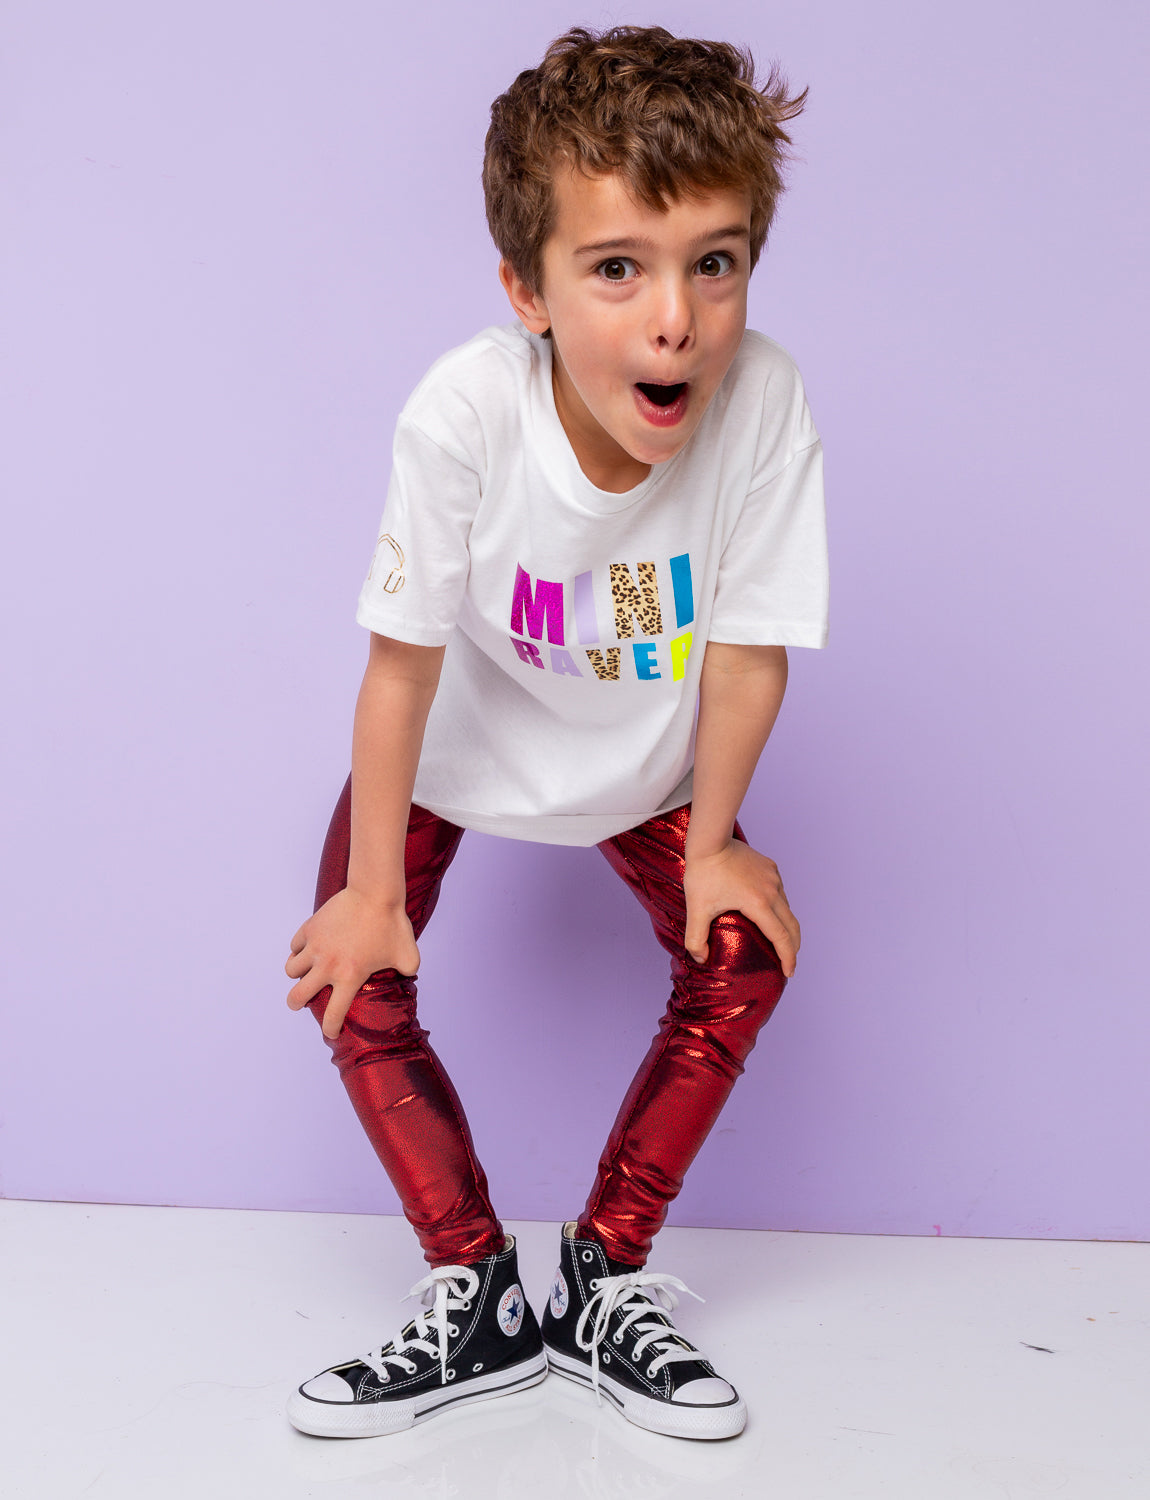 Boy modelling metallic red leggings and a white t-shirt with balck Converse trainers.